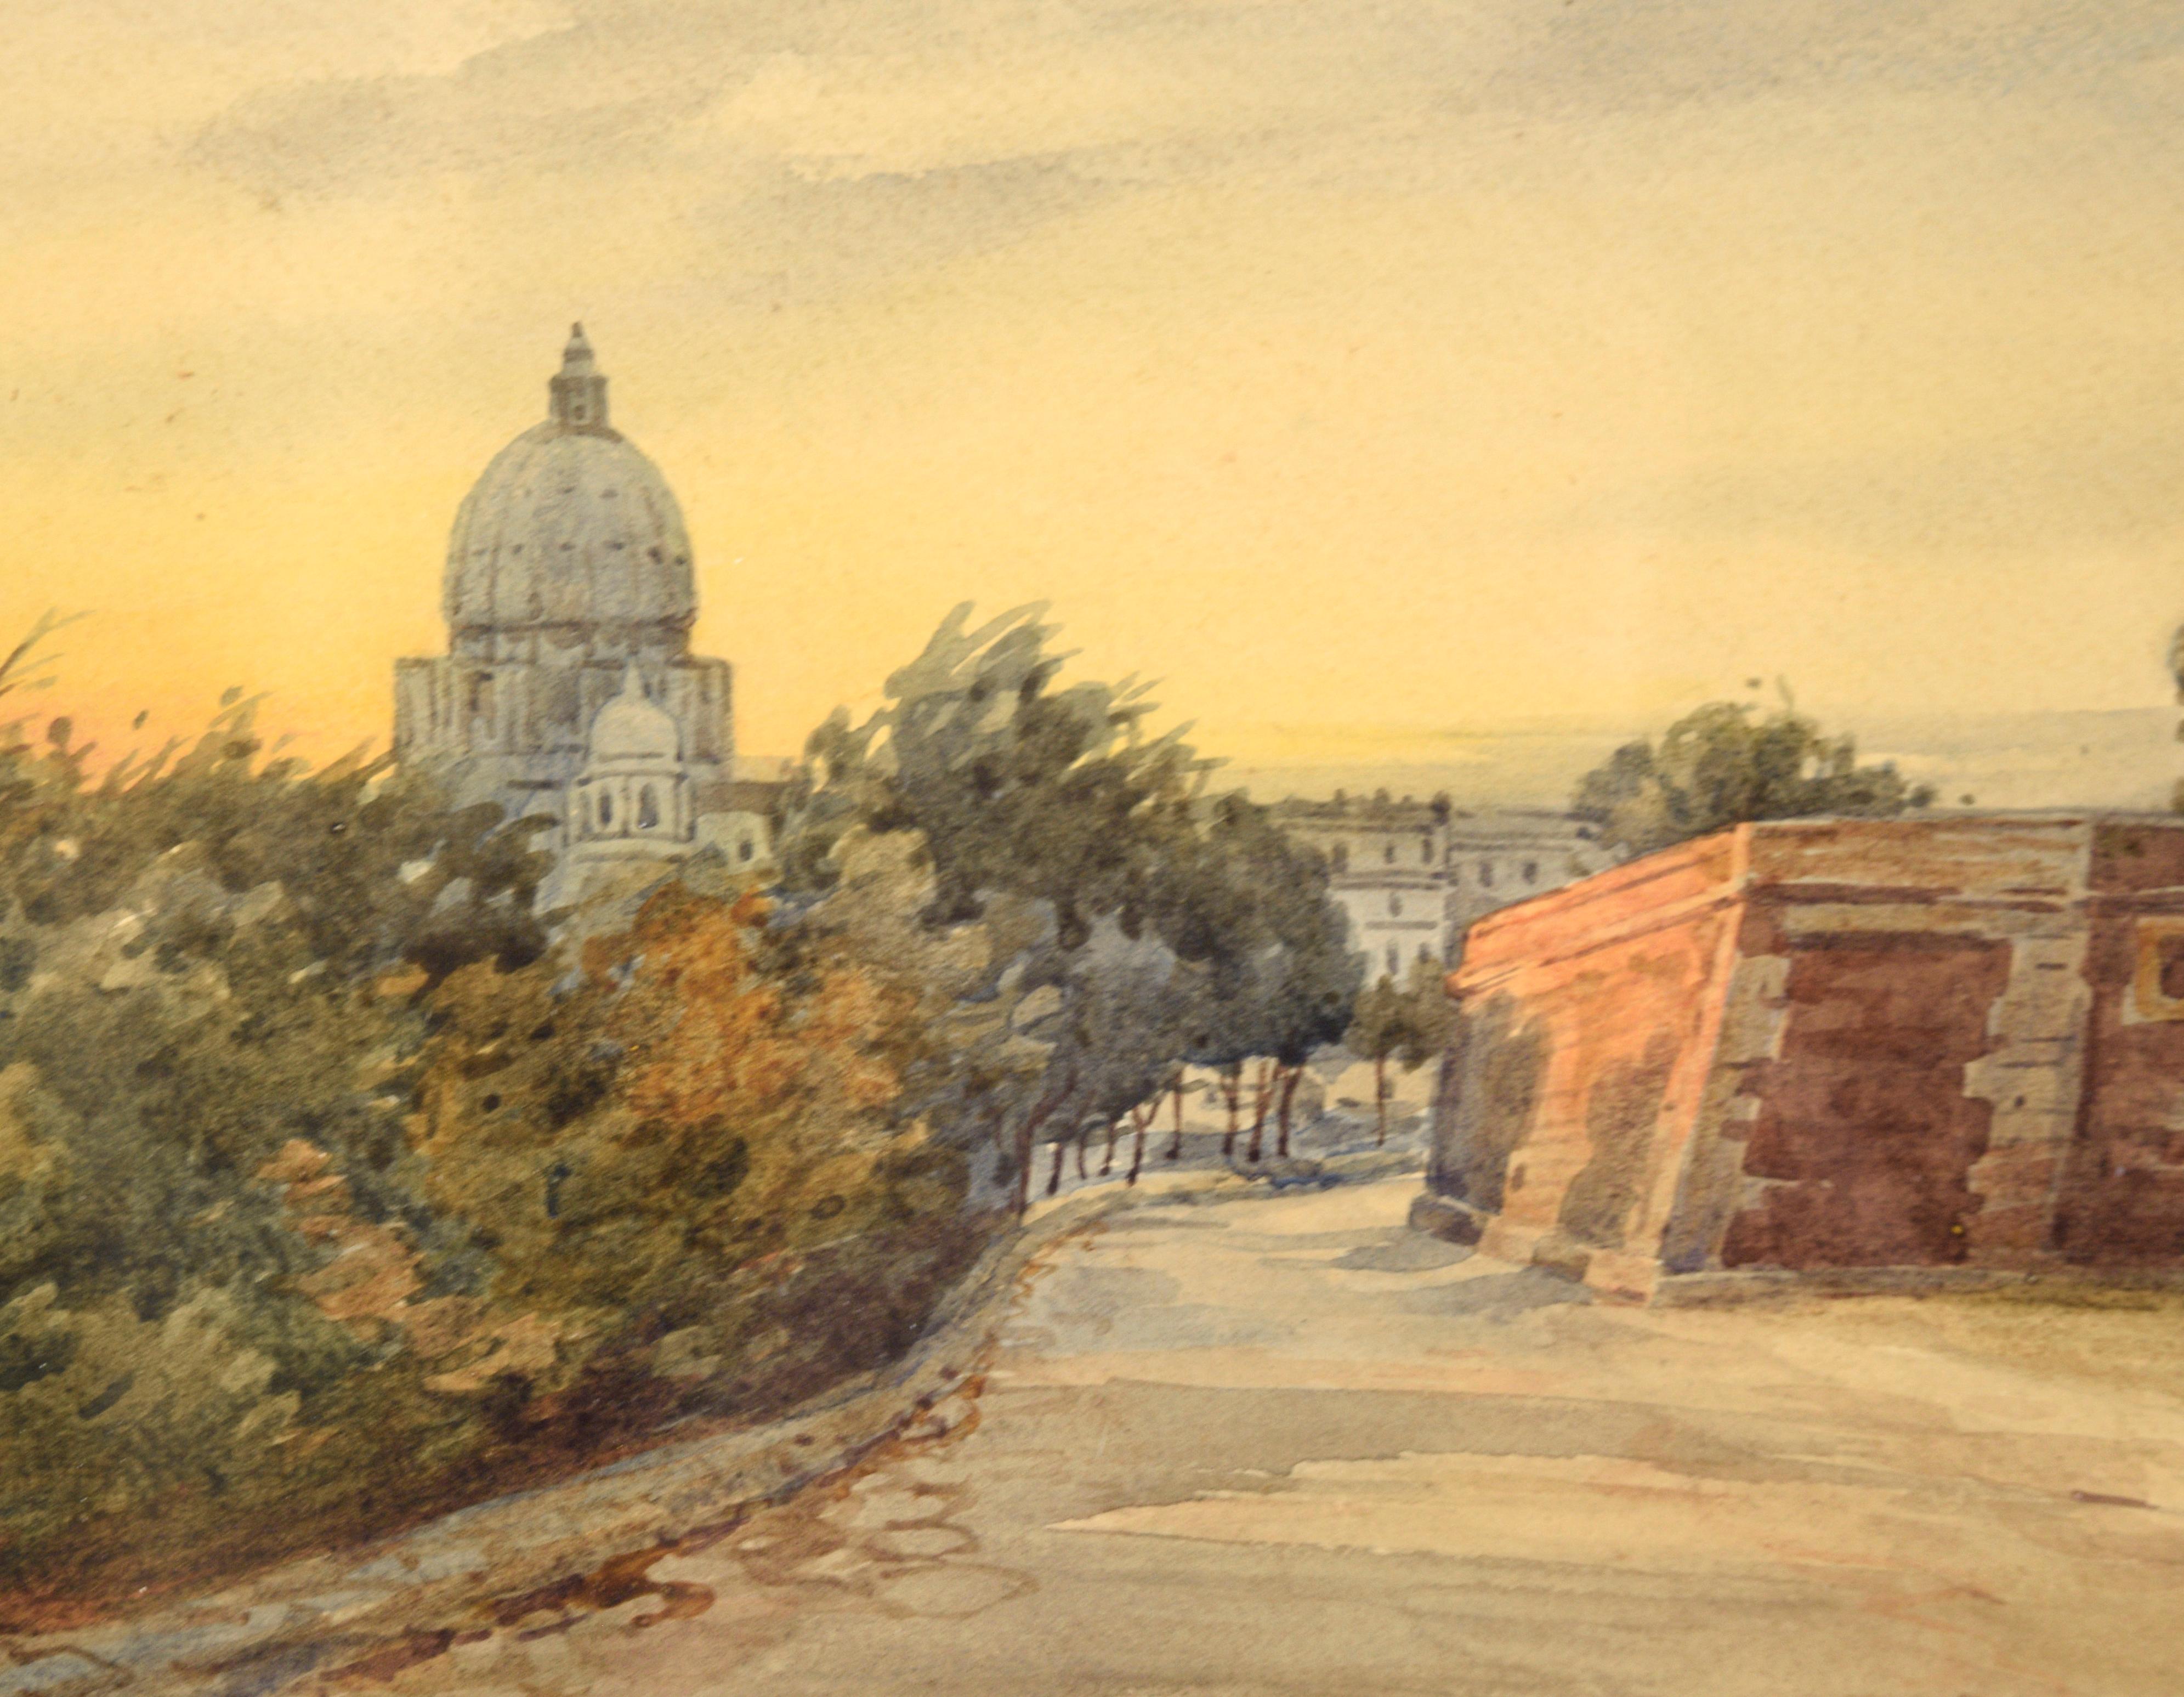 St. Peter's Basilica from the Edge of the City - Roman Lansdcape - Impressionist Art by Gaetano Facciola